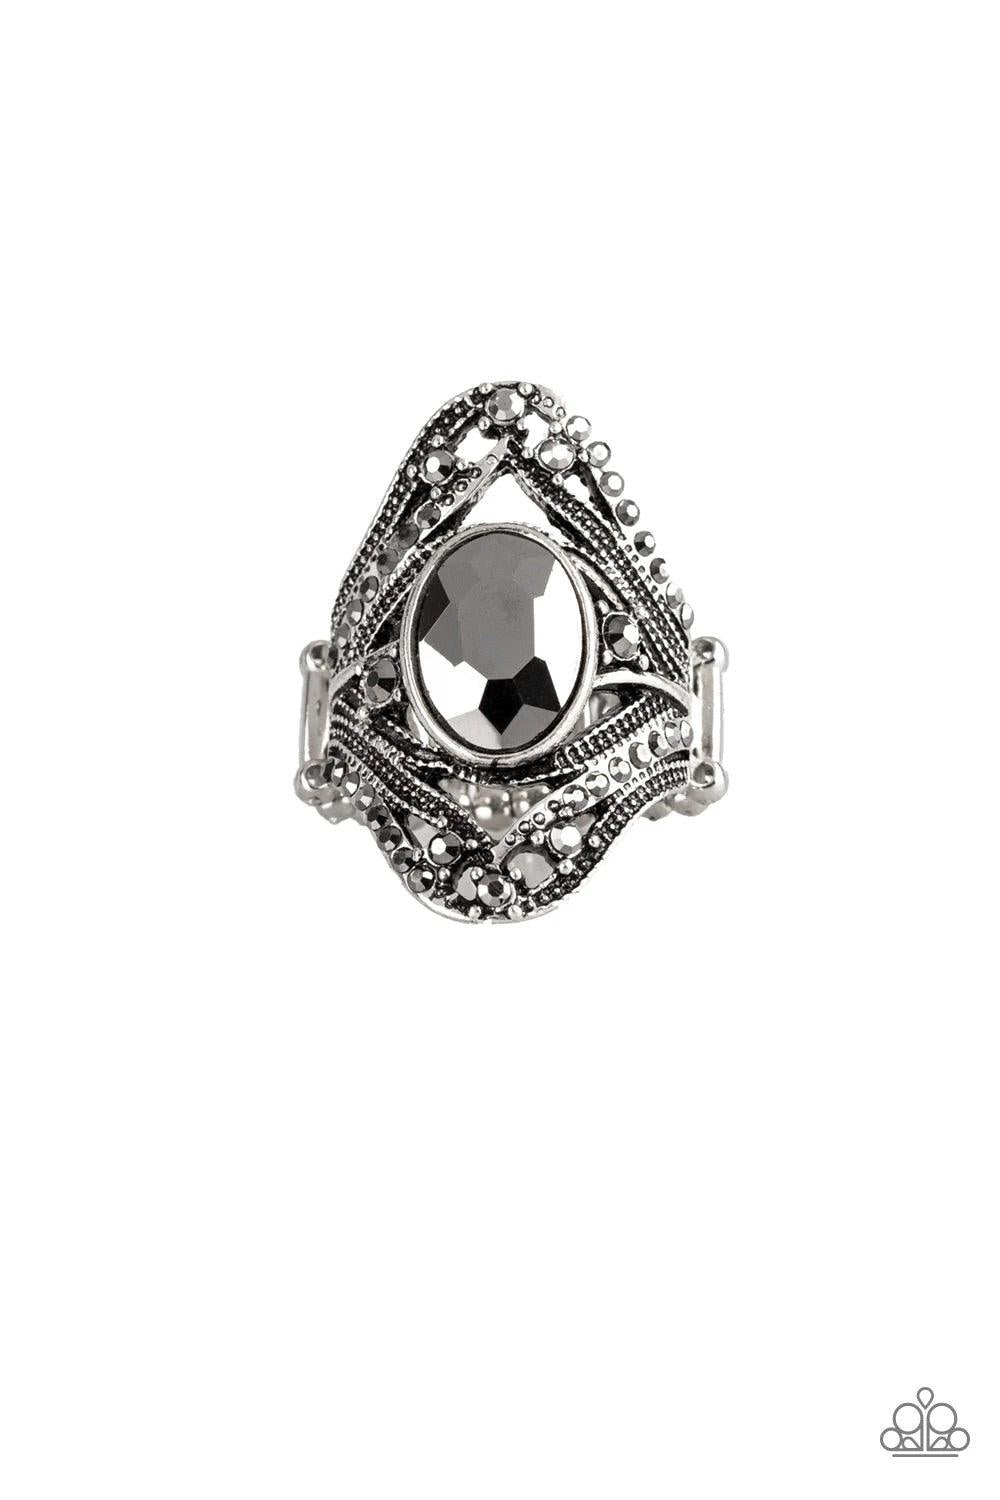 Paparazzi Accessories Red Carpet Rebel - Silver Radiating with dainty hematite rhinestones, studded silver bands whirl across the finger, coalescing into an ornate frame. An over sized hematite rhinestone is pressed into the center of the band for a drama